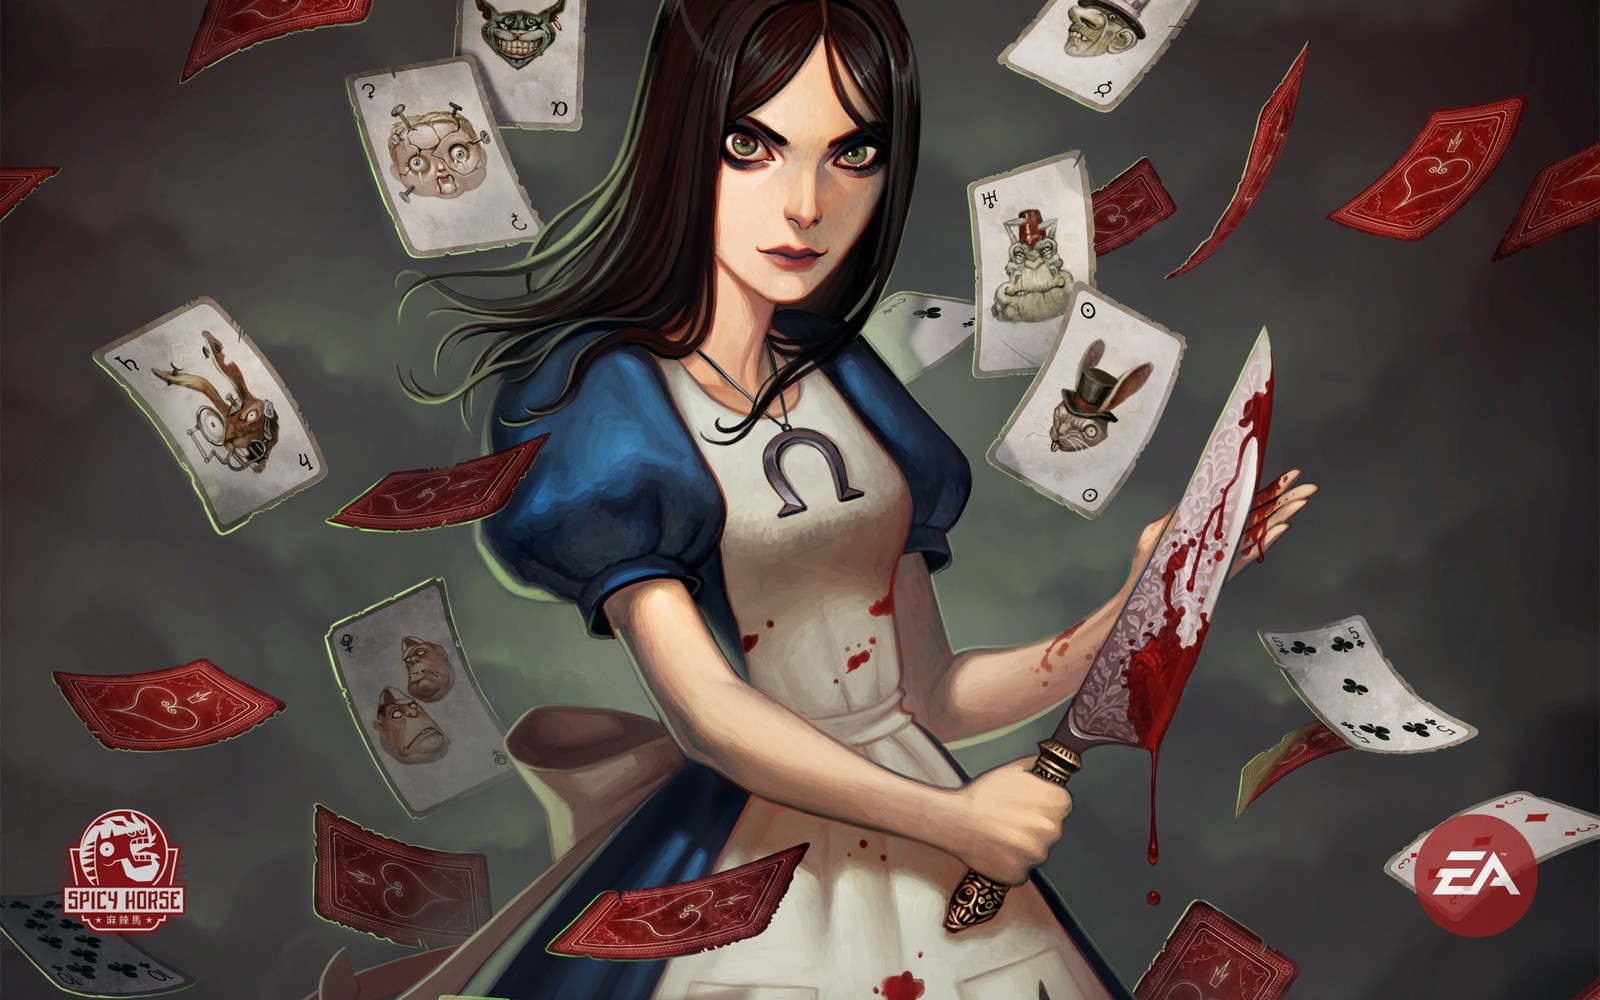 Art from American McGee's Alice featuring the blade